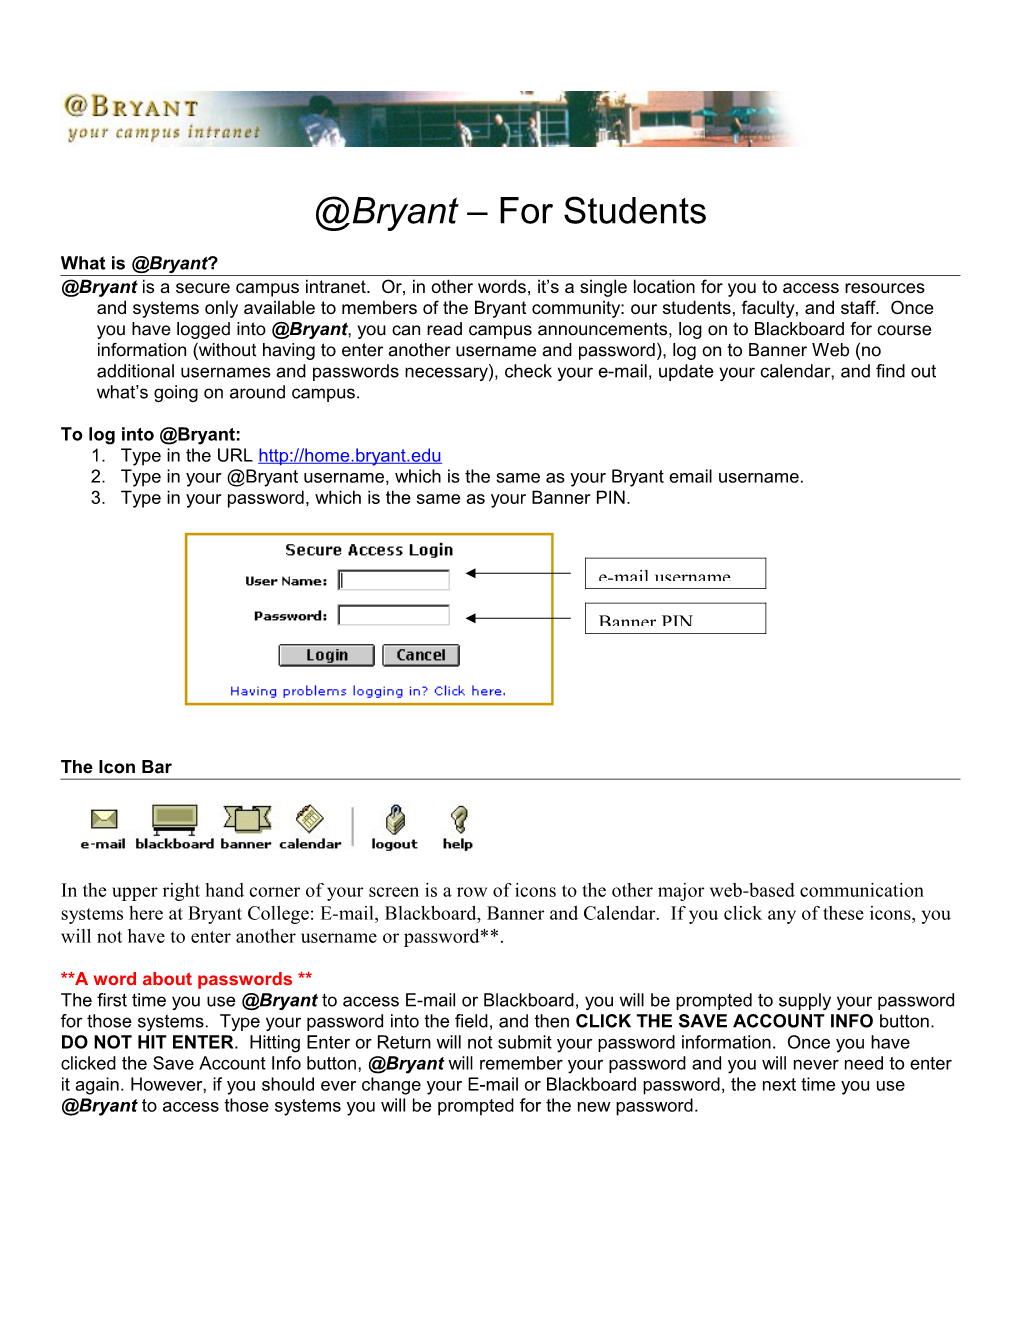 Bryant for Students